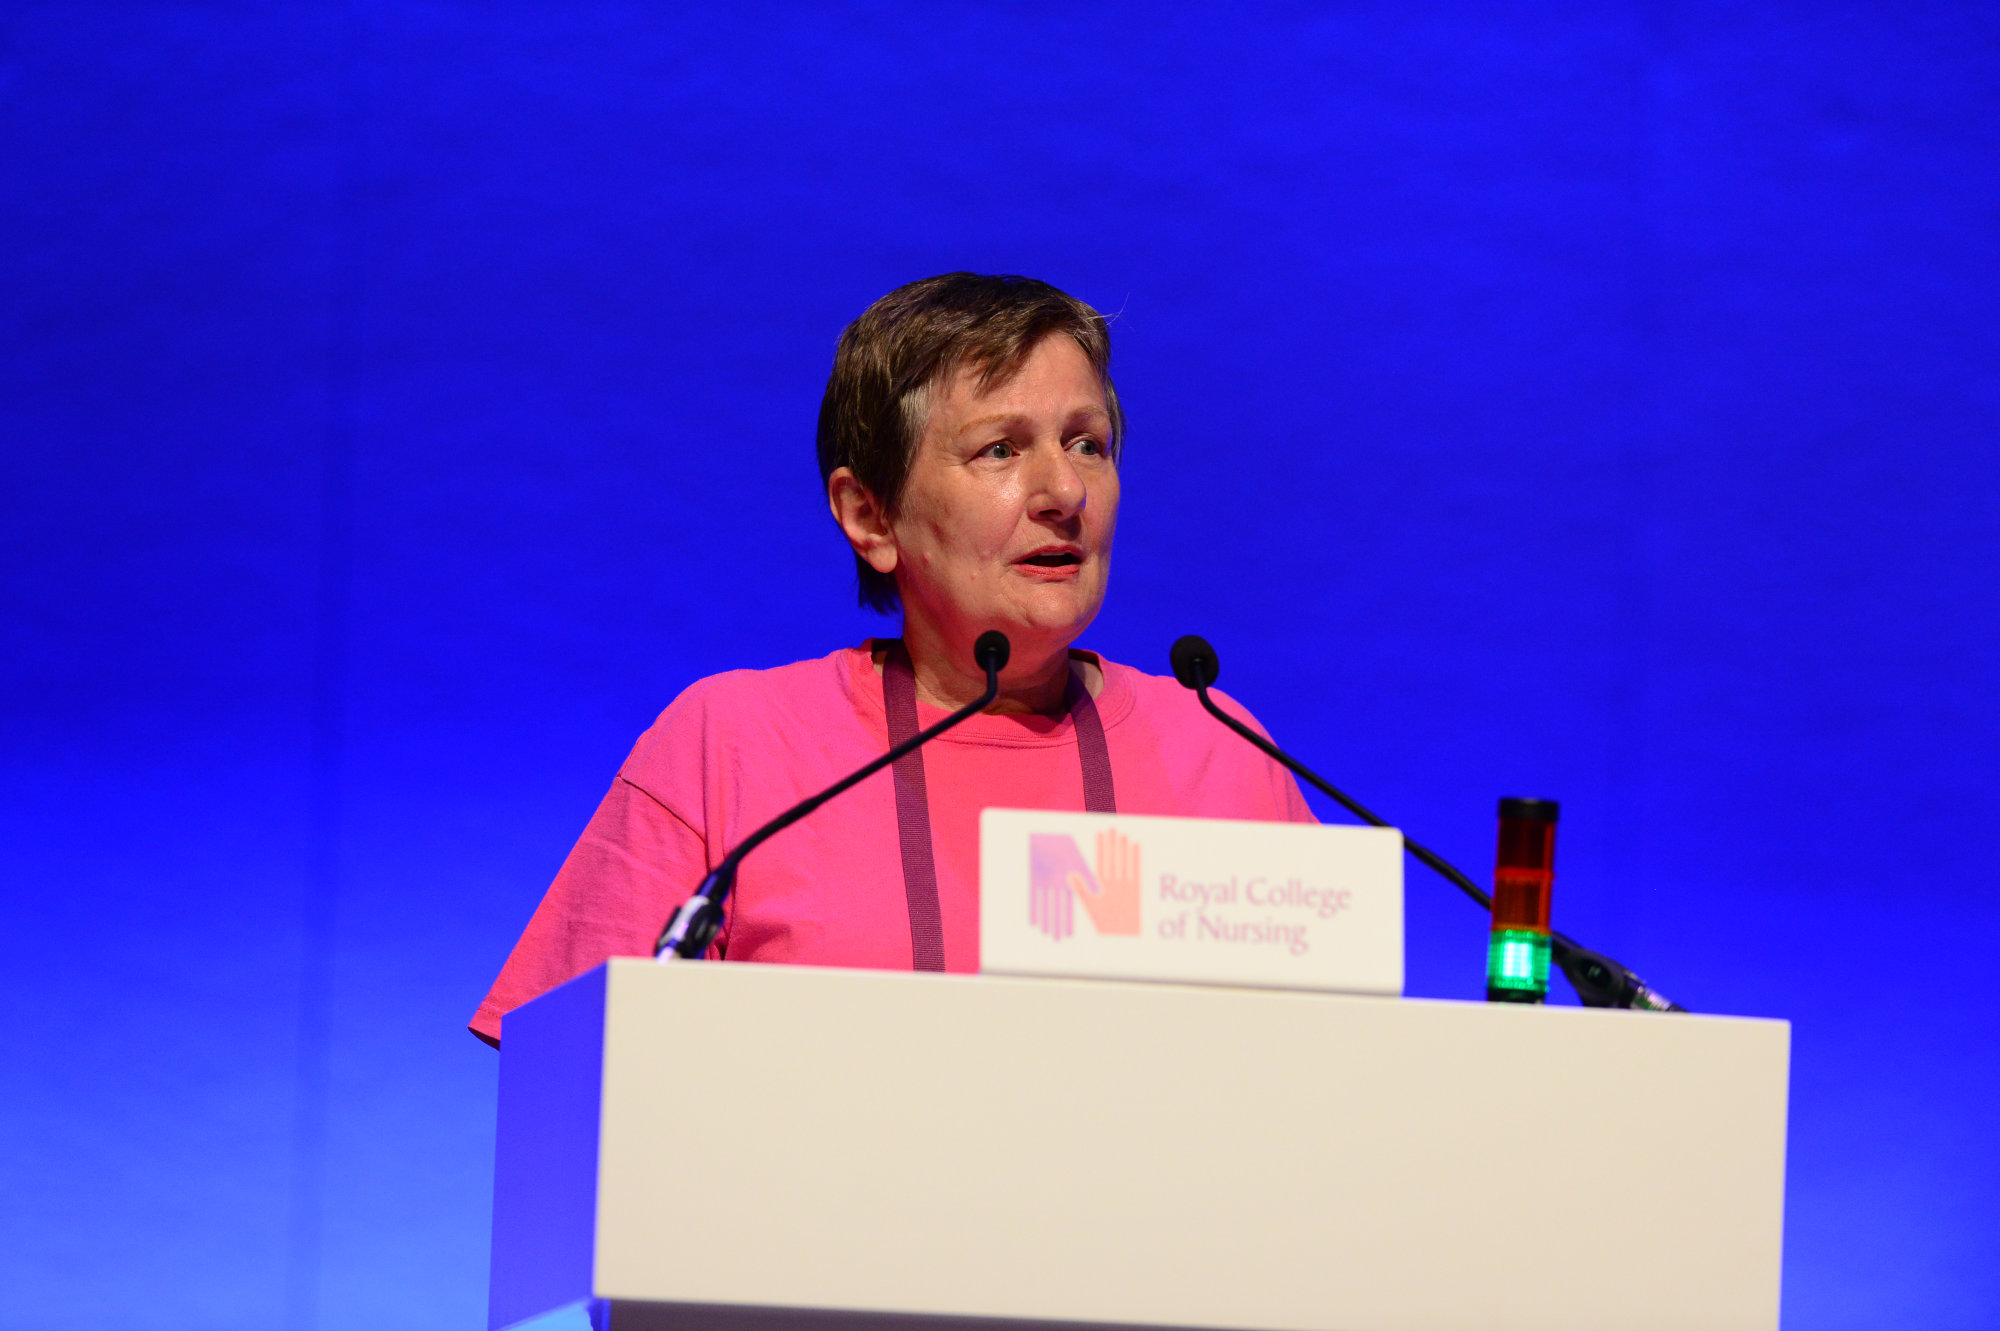 Marion Philip on stage at Congress 2018 in Belfast